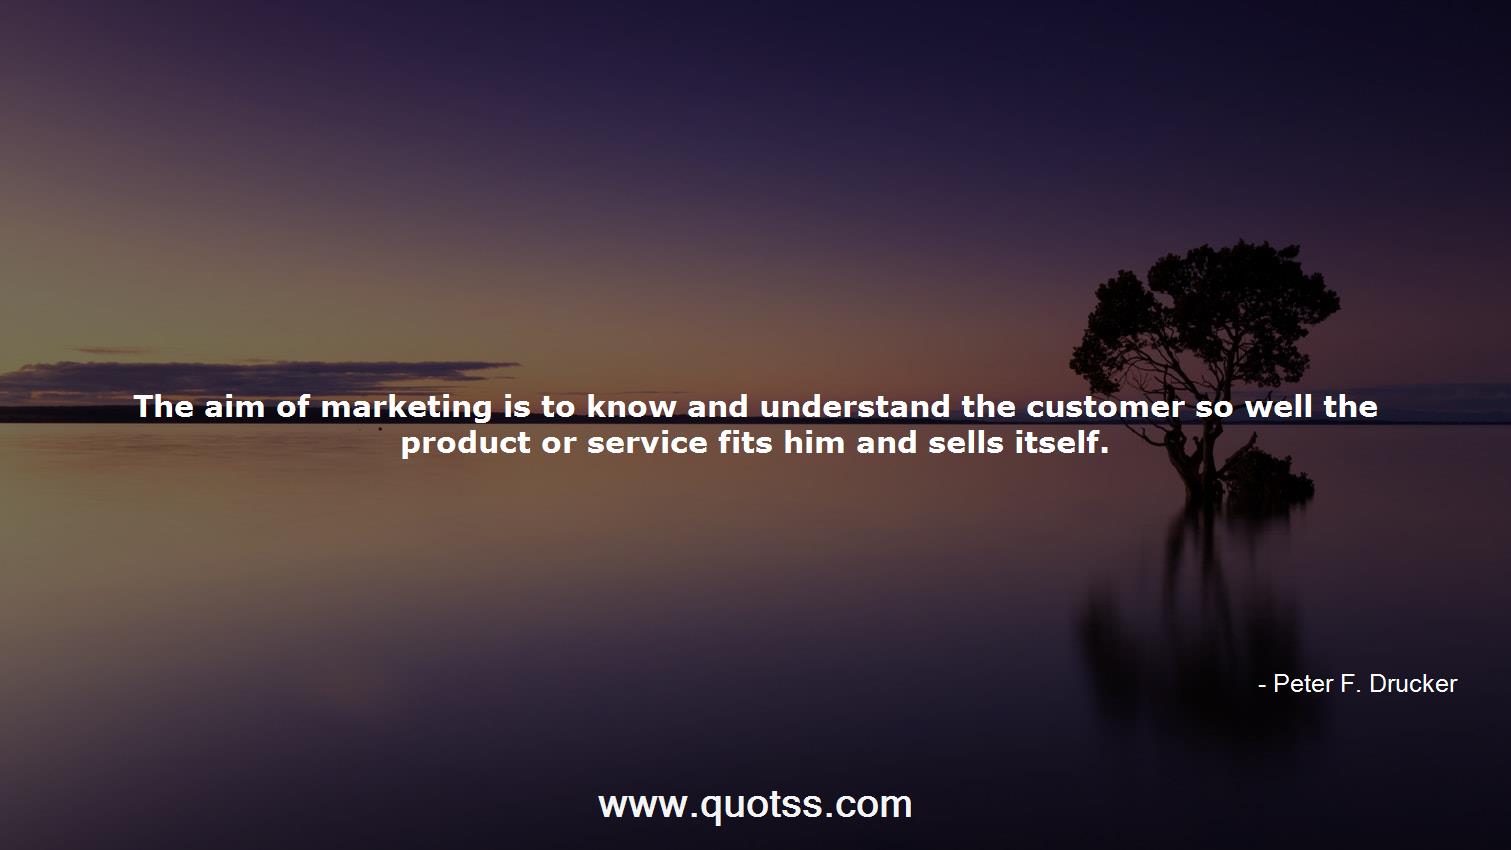 Peter F. Drucker Quote on Quotss